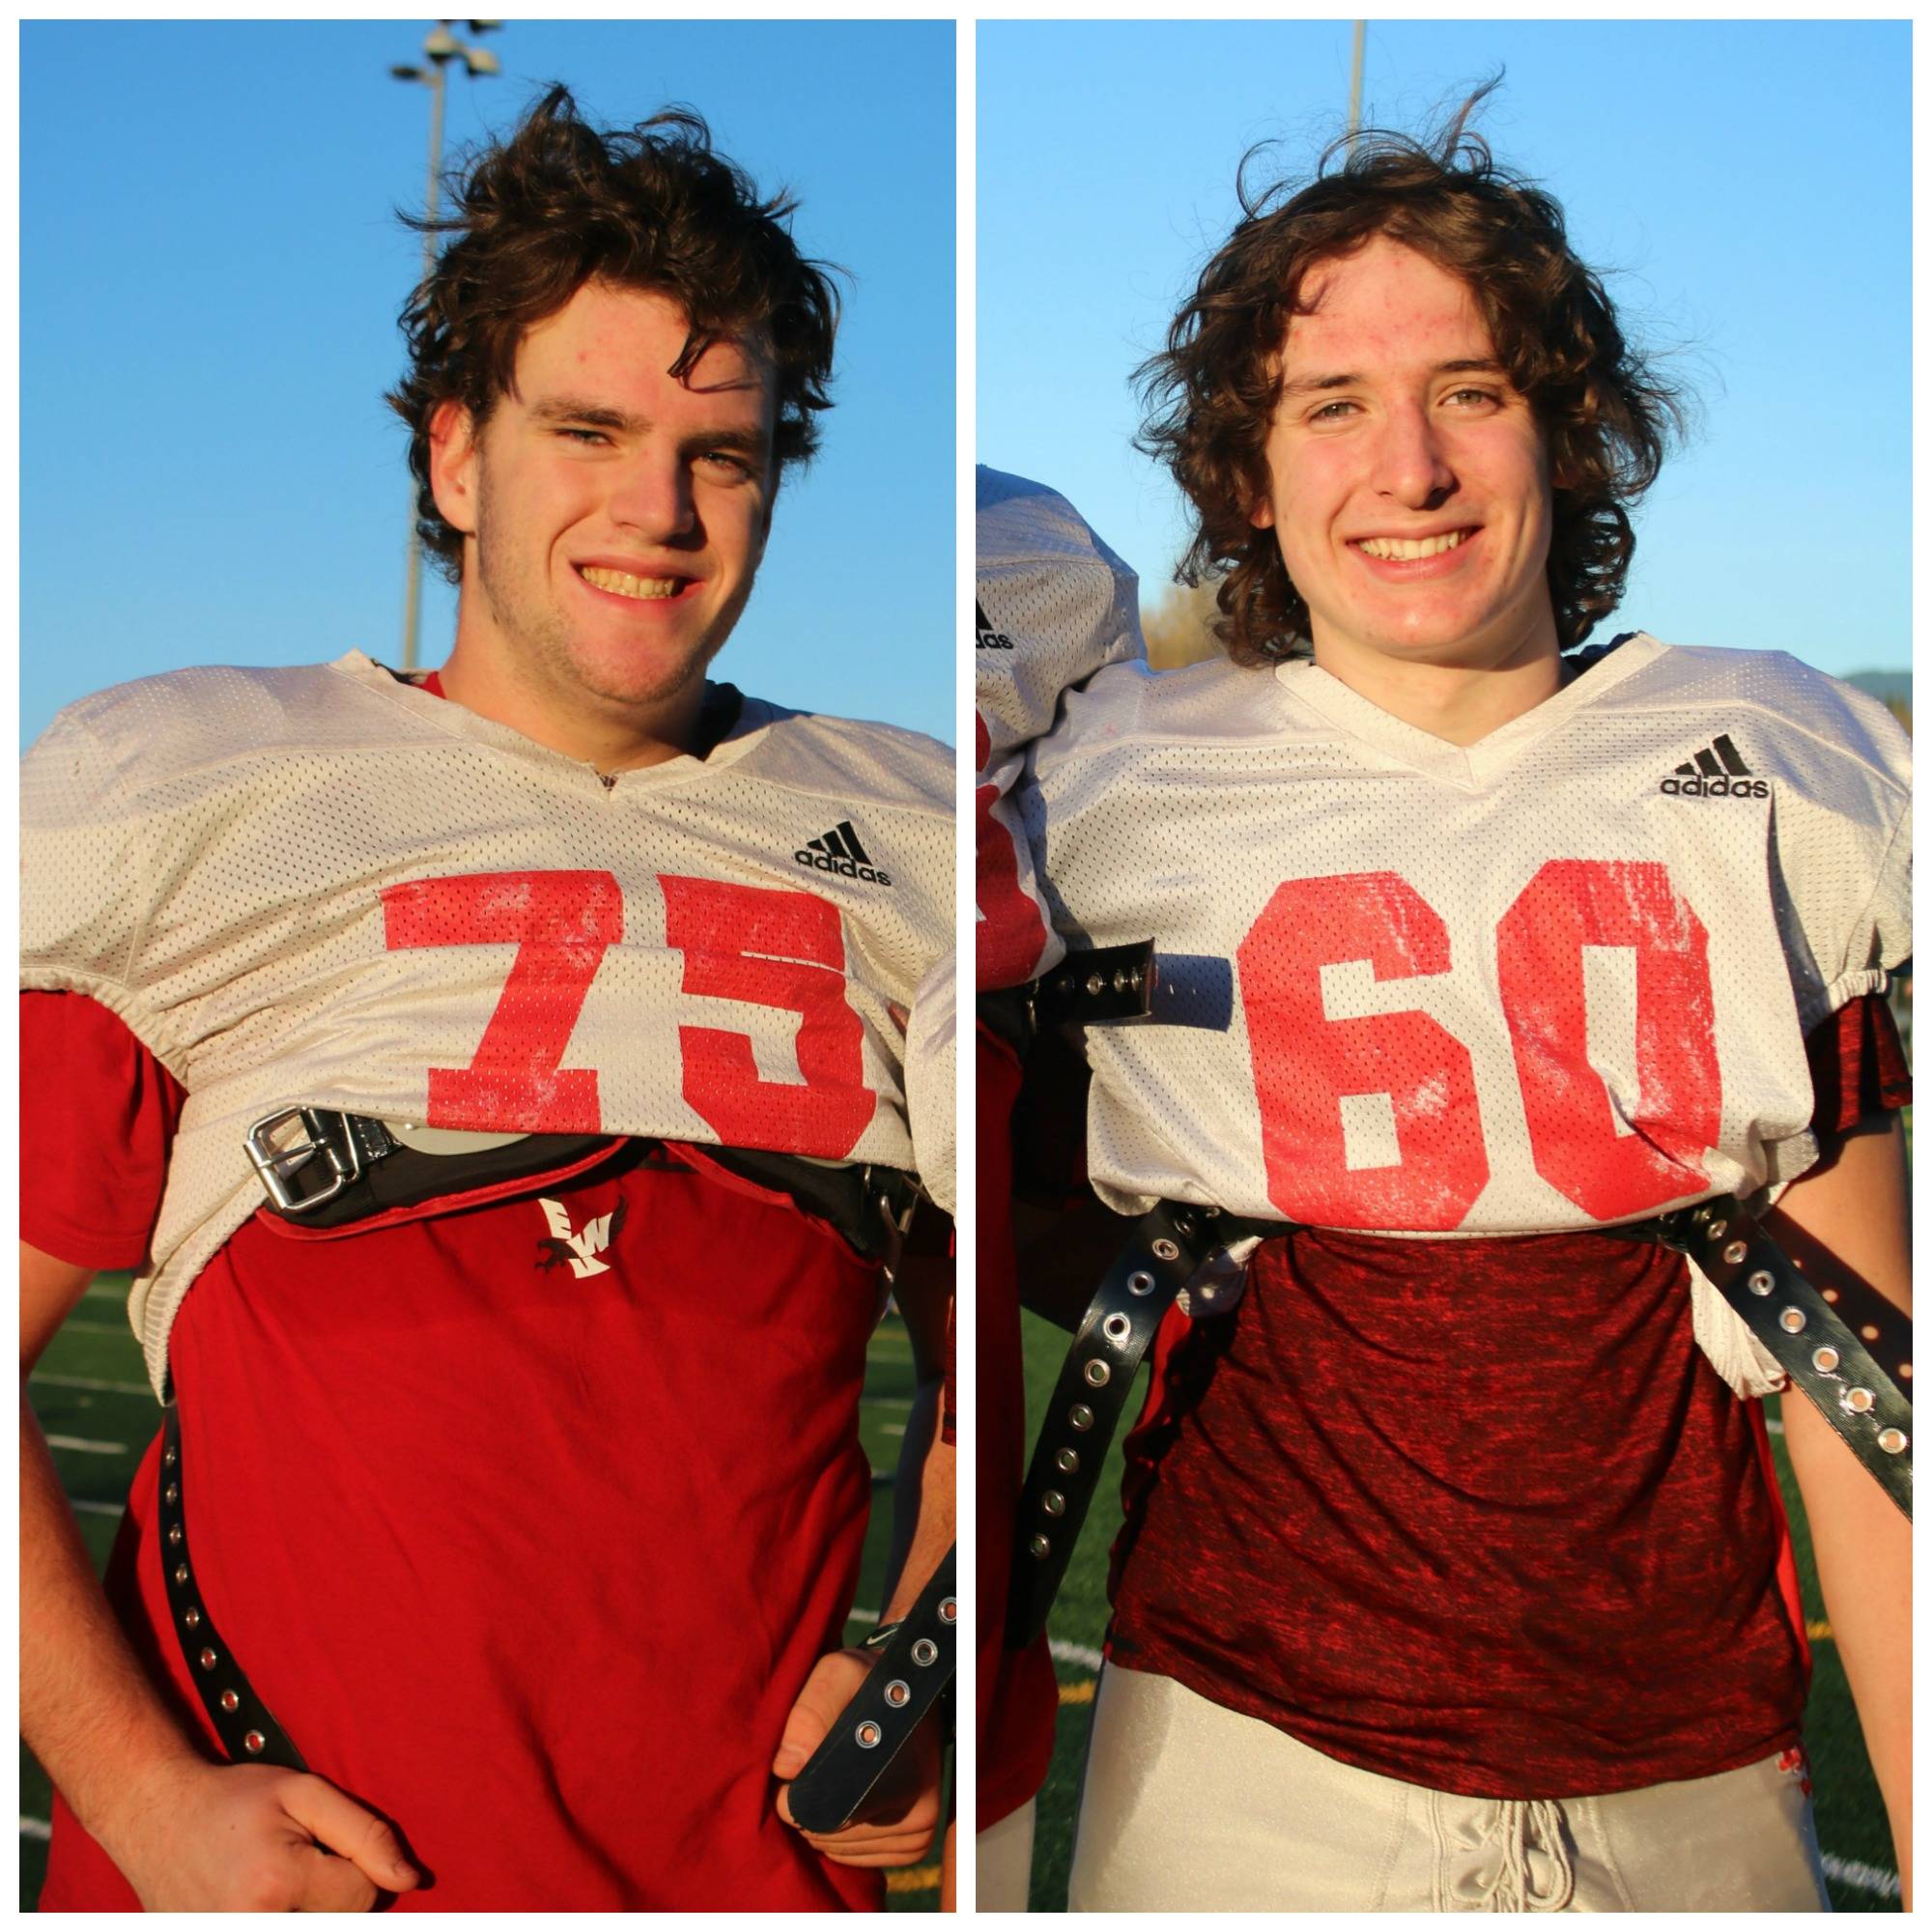 Mount Si captains Gale Kamp, left, and Cooper McQuay. Andy Nystrom/ staff photos